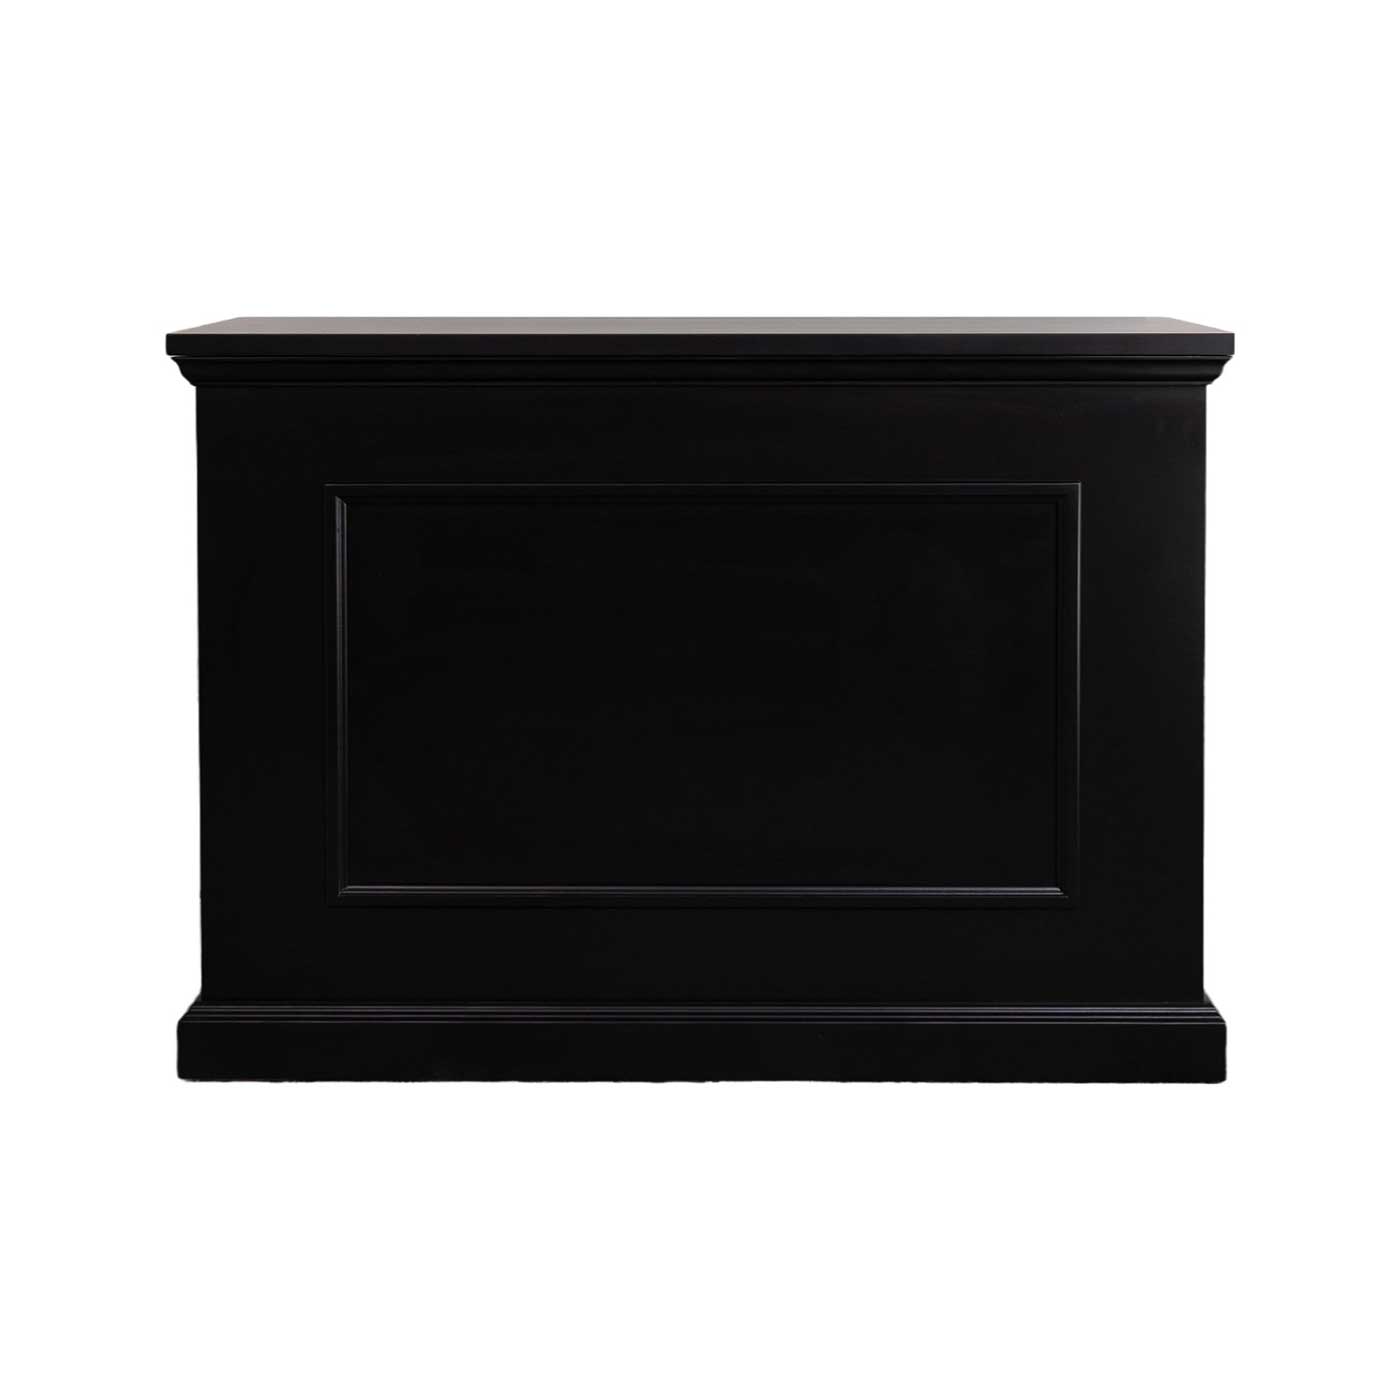 Touchstone Elevate 72011 TV Lift Cabinet in Black wood finish pictured from the front.